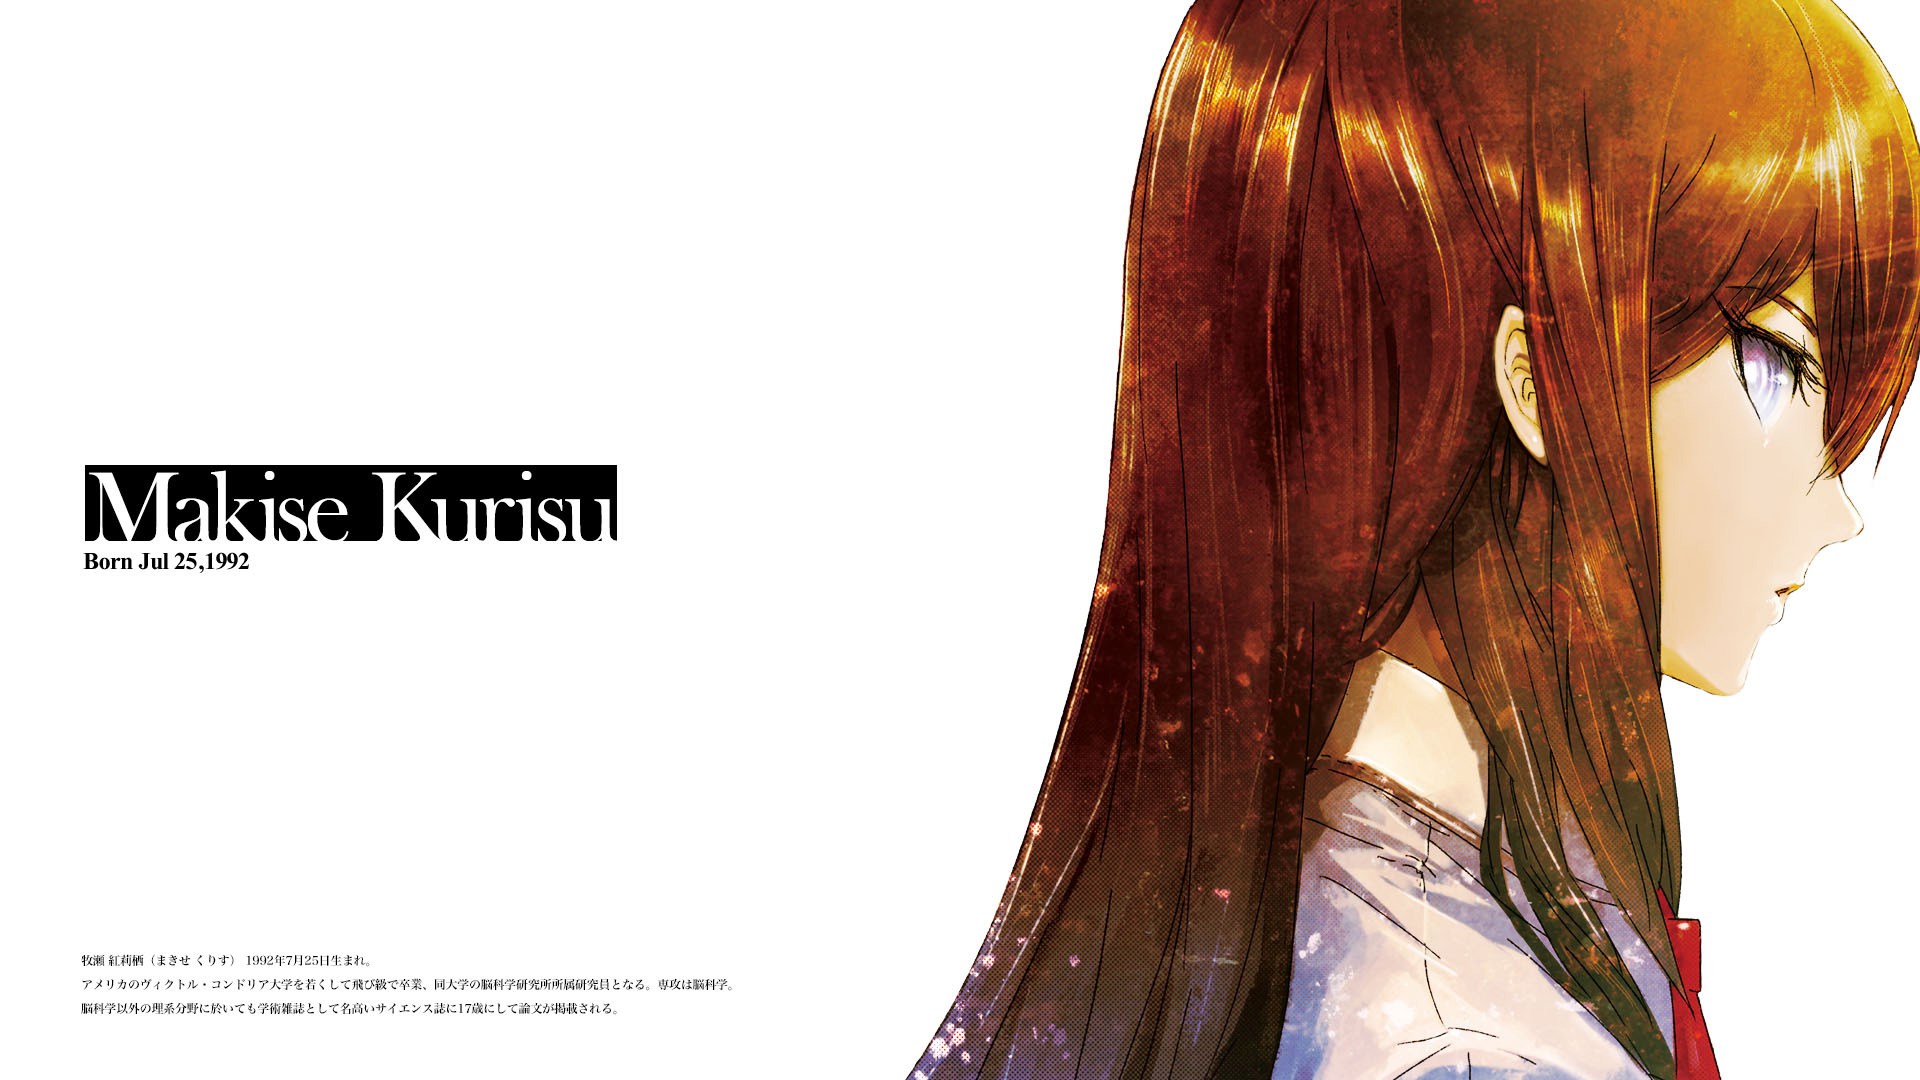 Kurisu Makise S BirtHDay With This Special Steins Gate Wallpaper